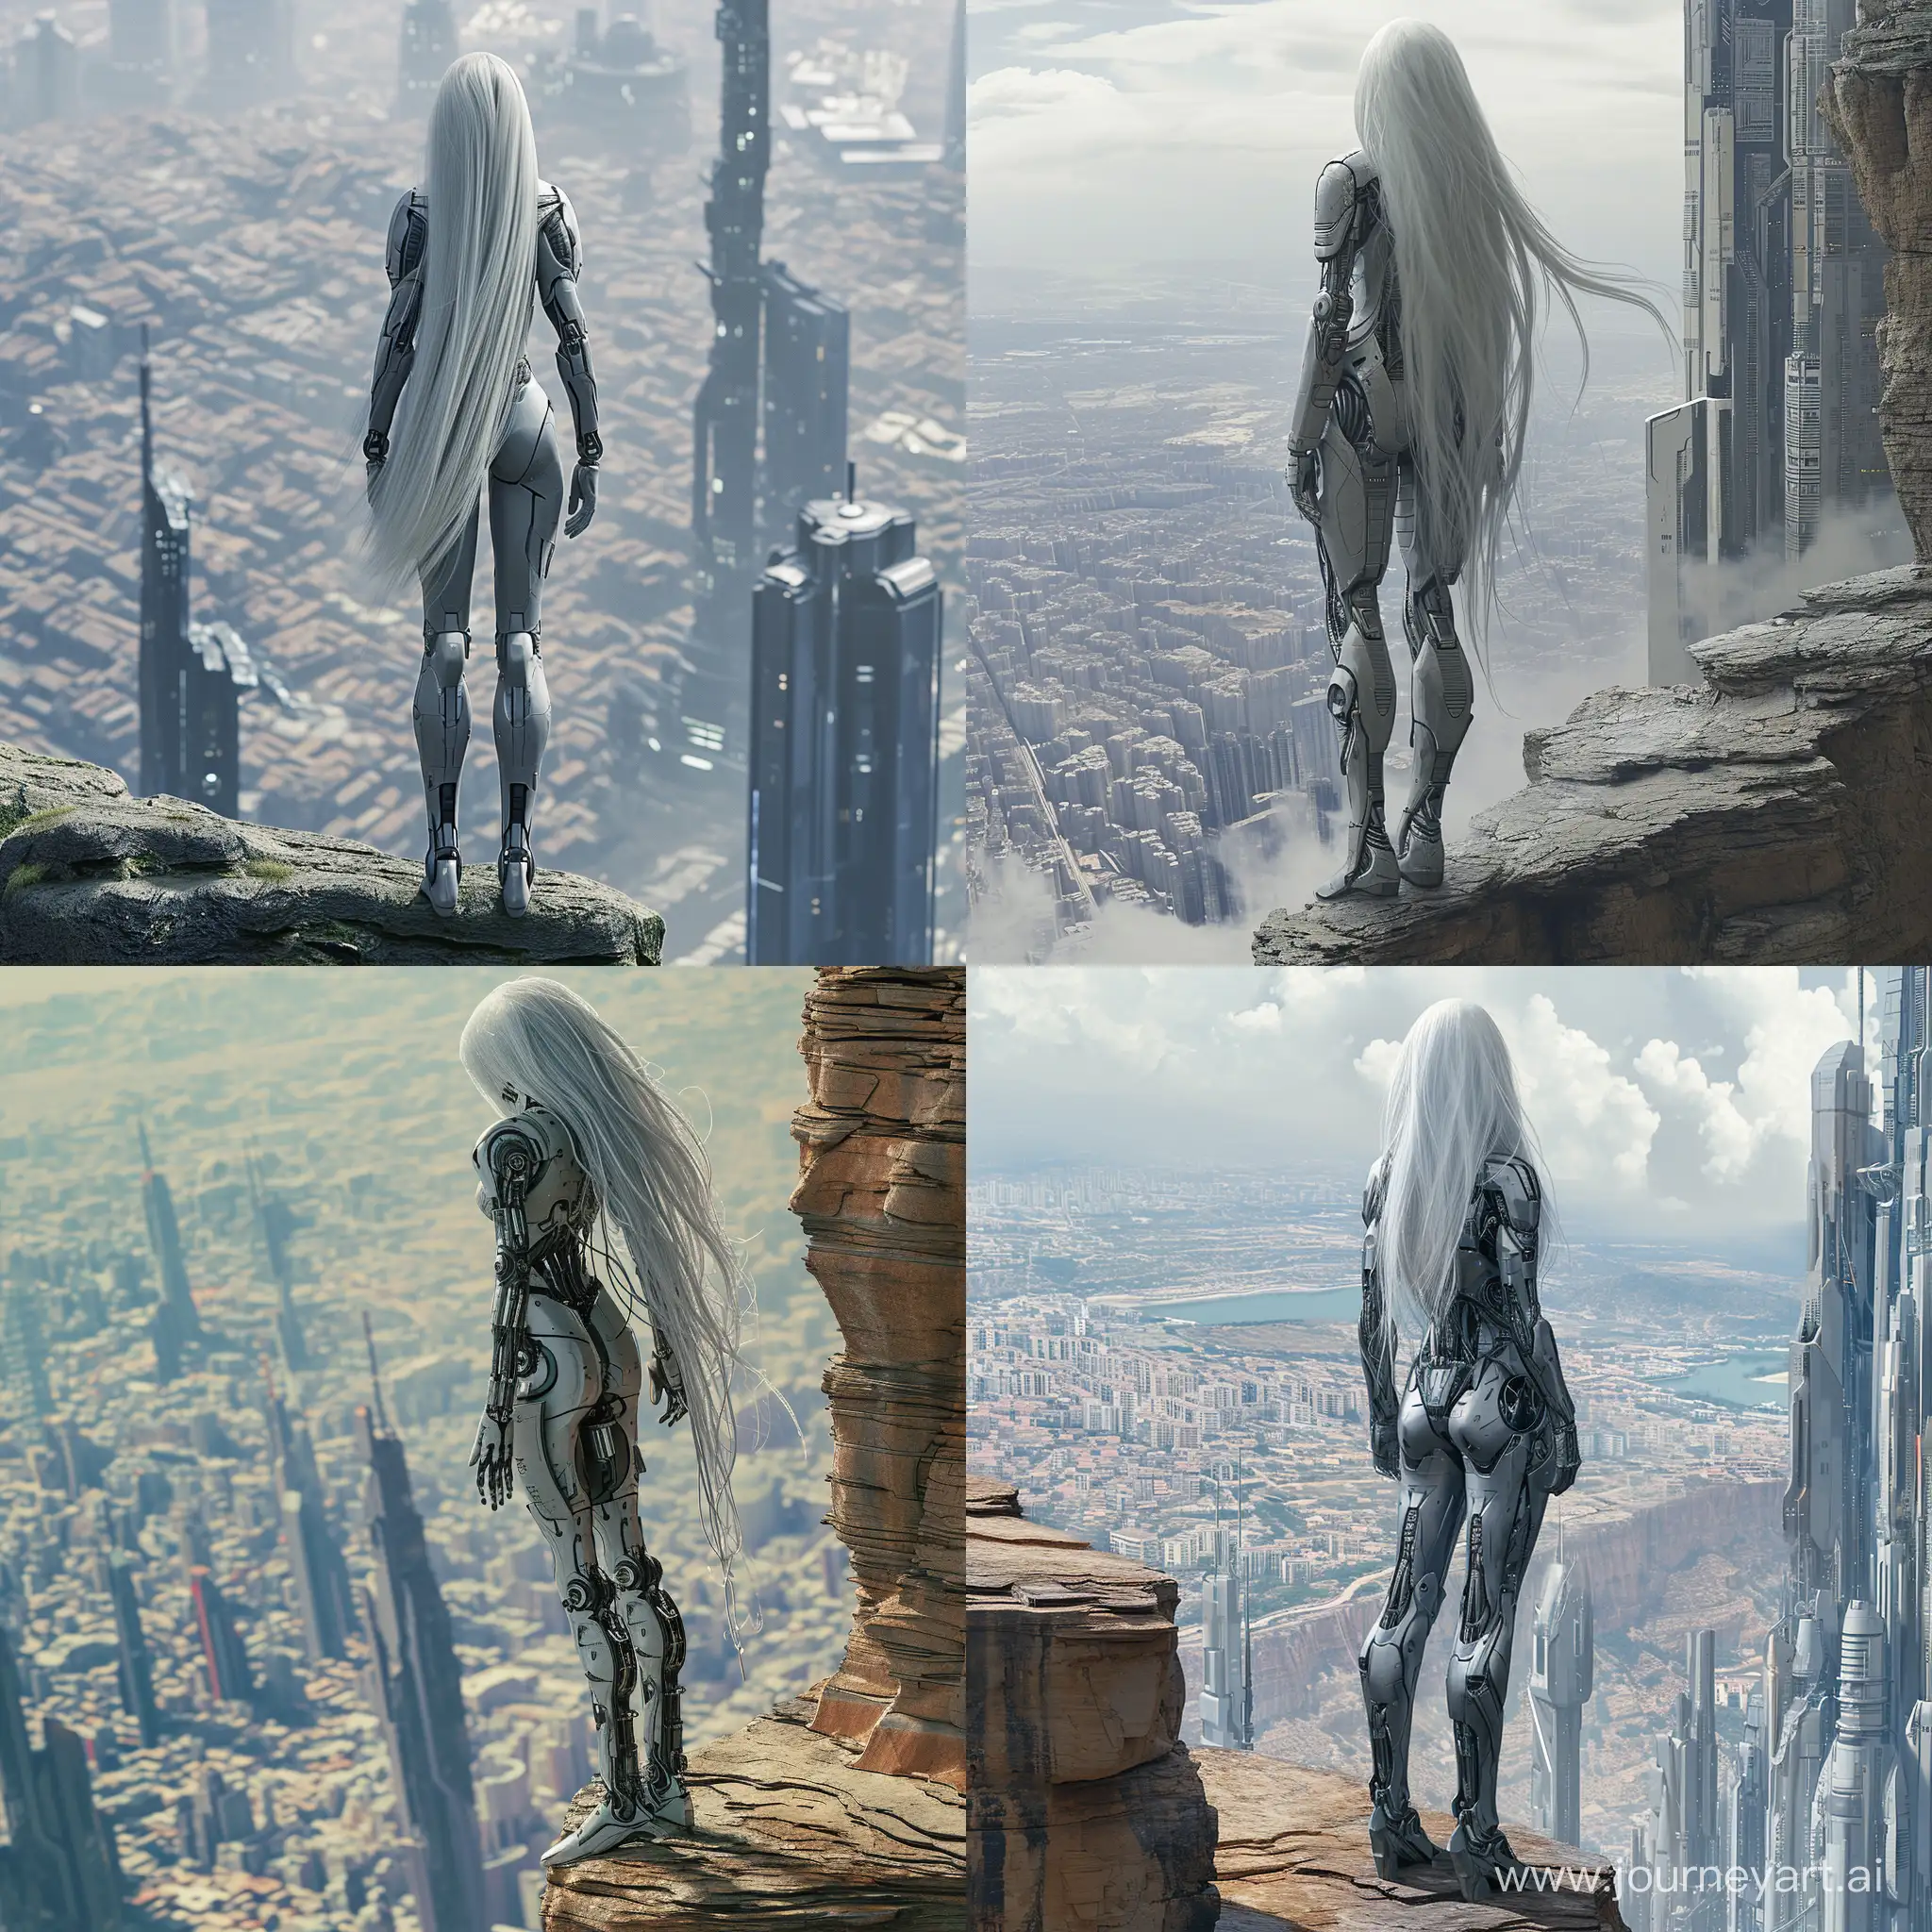 Futuristic-Alien-Cyborg-Overlooking-Cityscape-with-Long-White-Hair